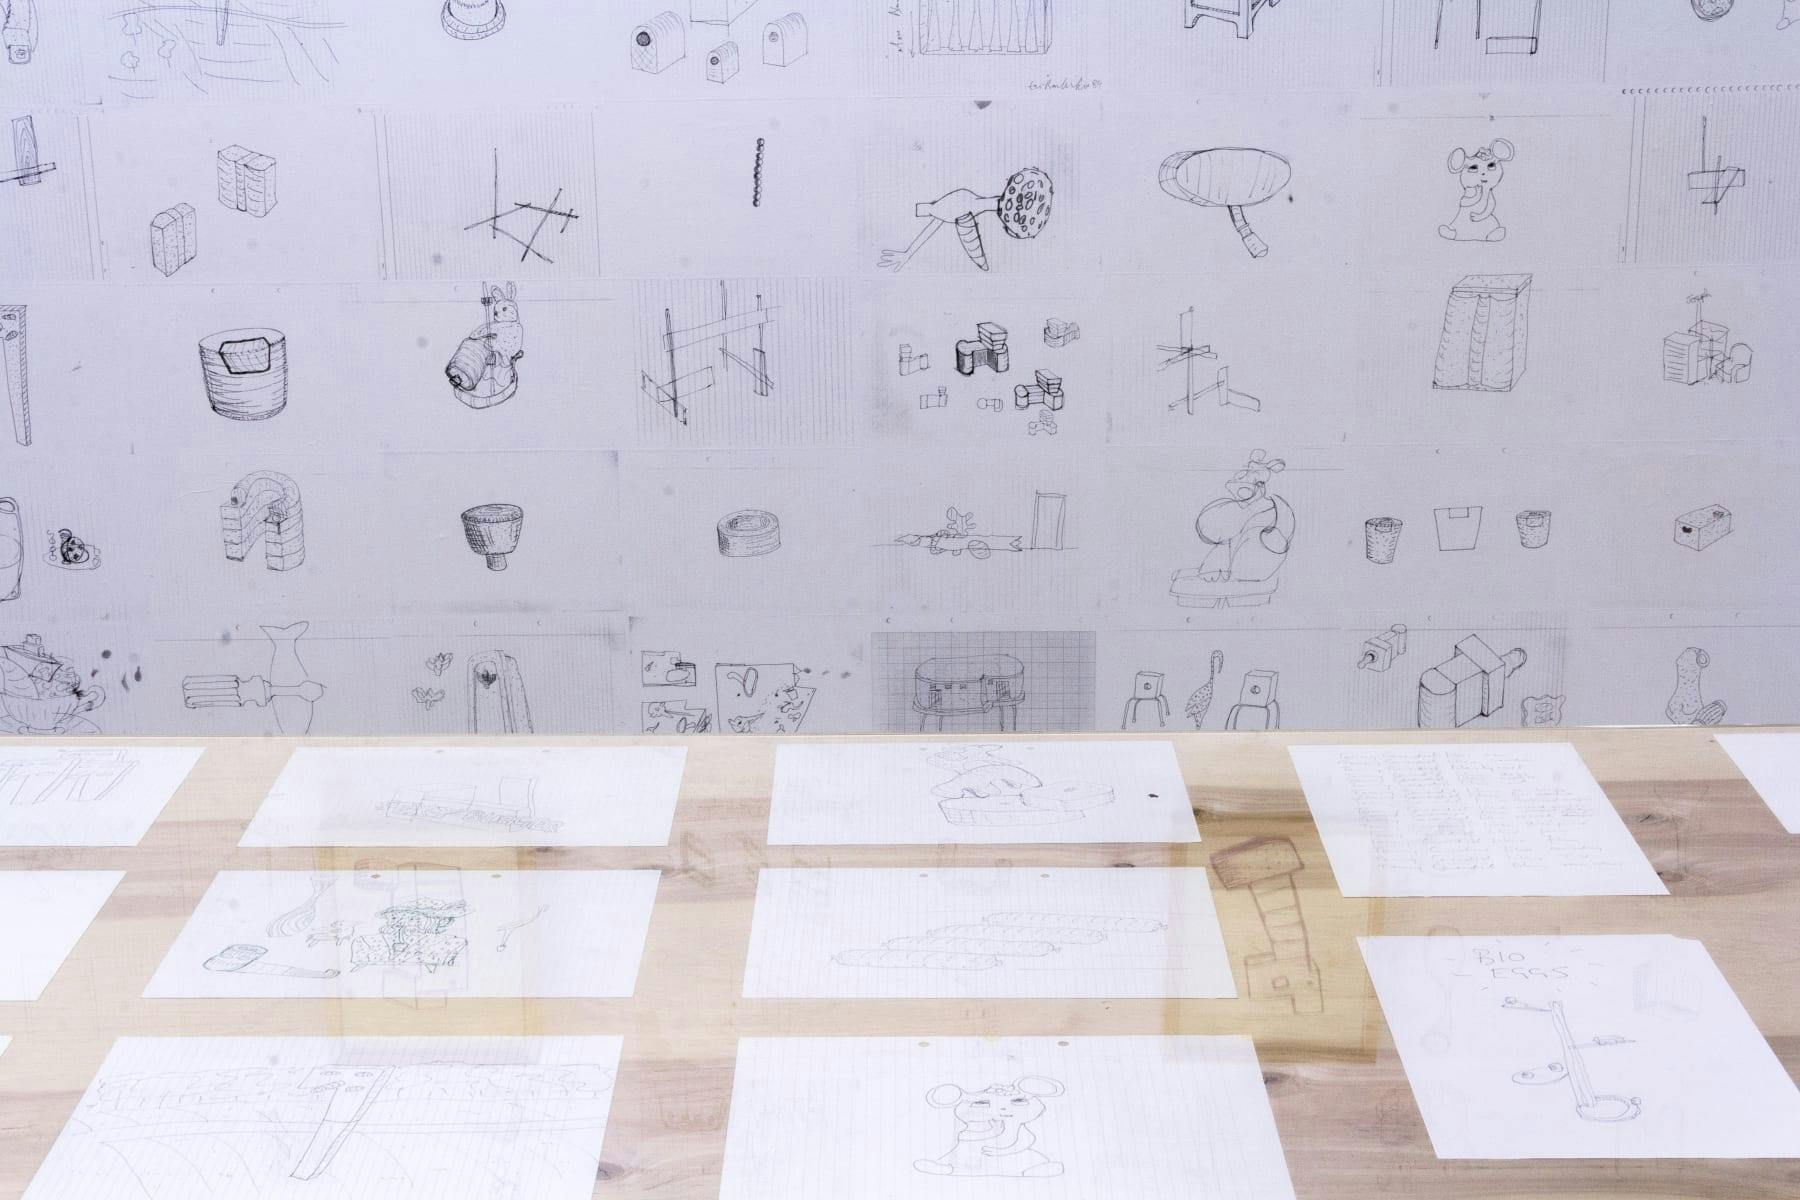 A wall with pasted drawings from the artist's studio frame a series of smaller drawings that express ideas for potential sculptures that use everyday objects like furniture and children's toys. 